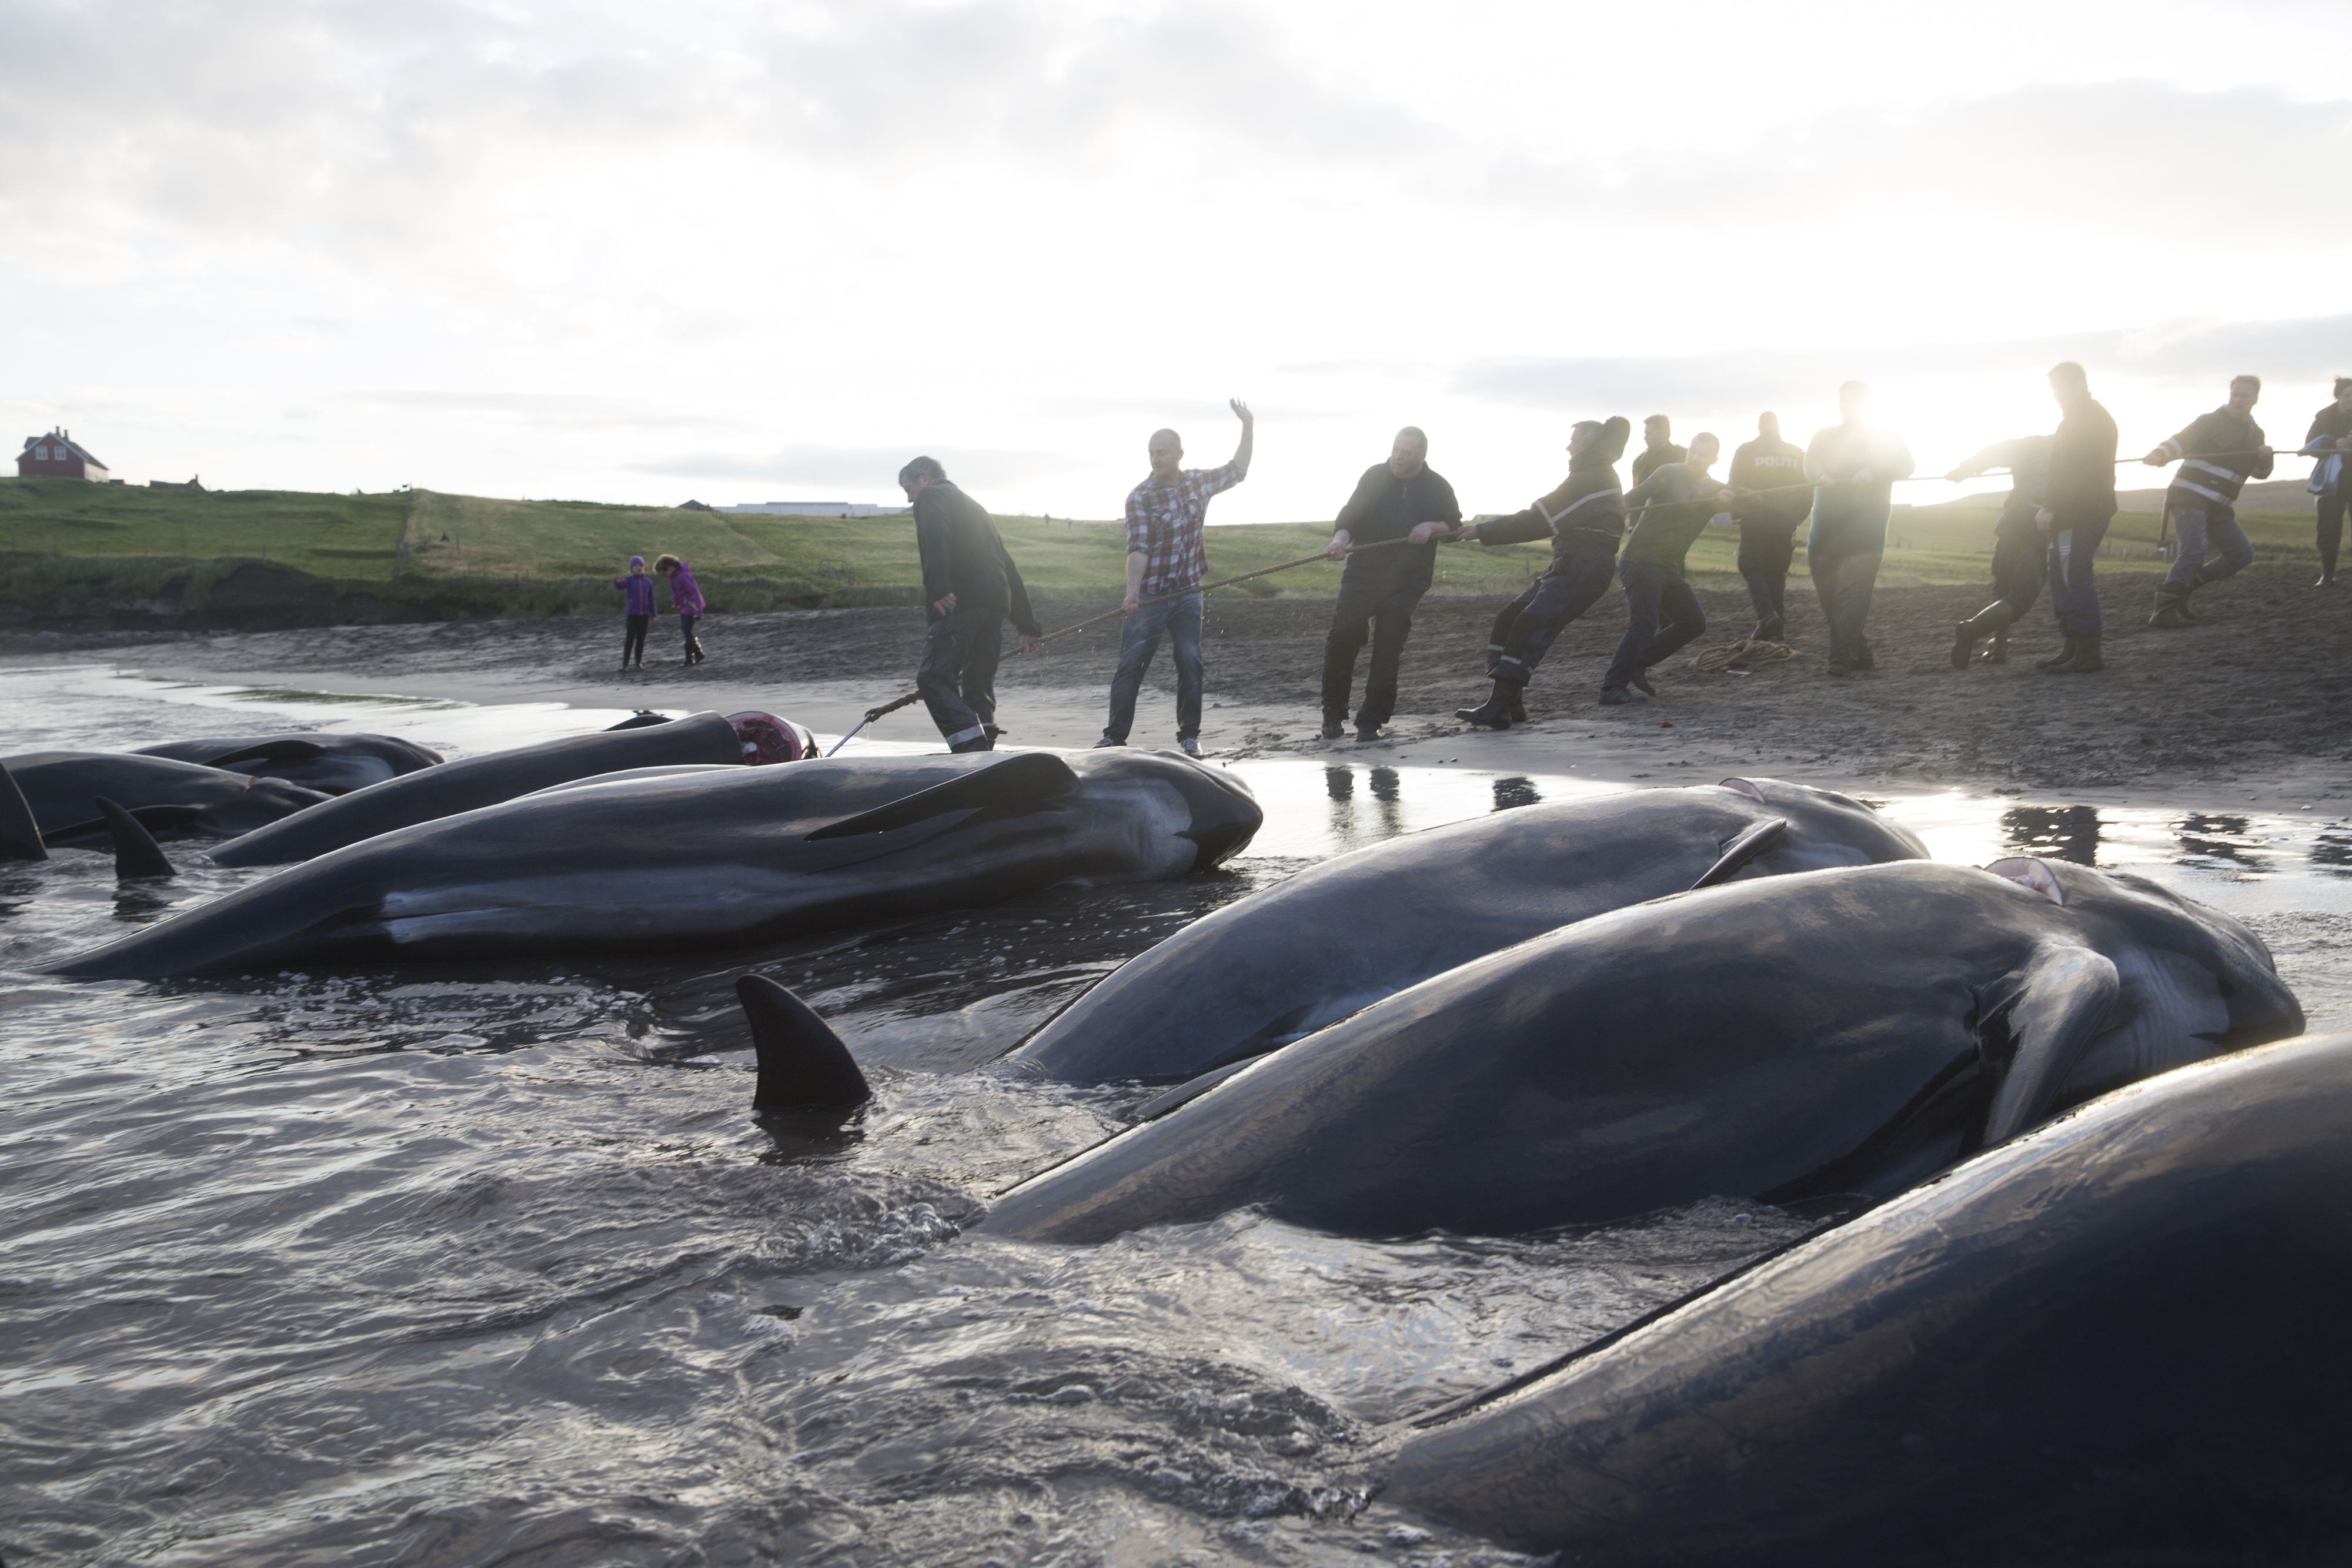 Tradition or travesty? A TED Fellow’s documentary investigates the
complexities of whale hunting in the Faroe Islands